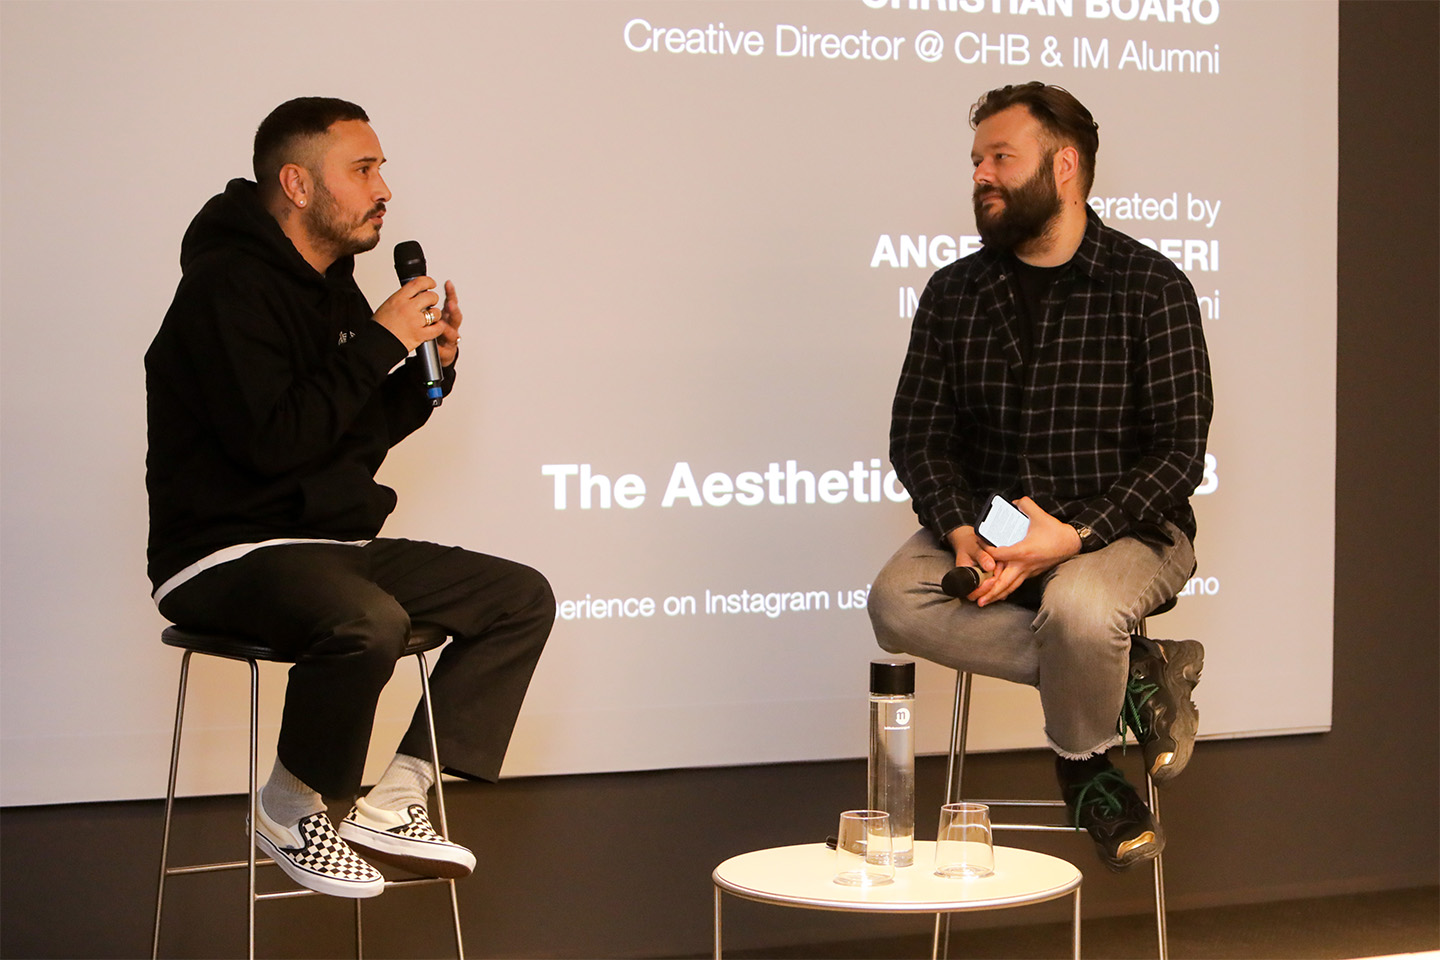 The 'In conversation with' event with guest Christian Boaro, CHB brand founder and Istituto Marangoni alumnus